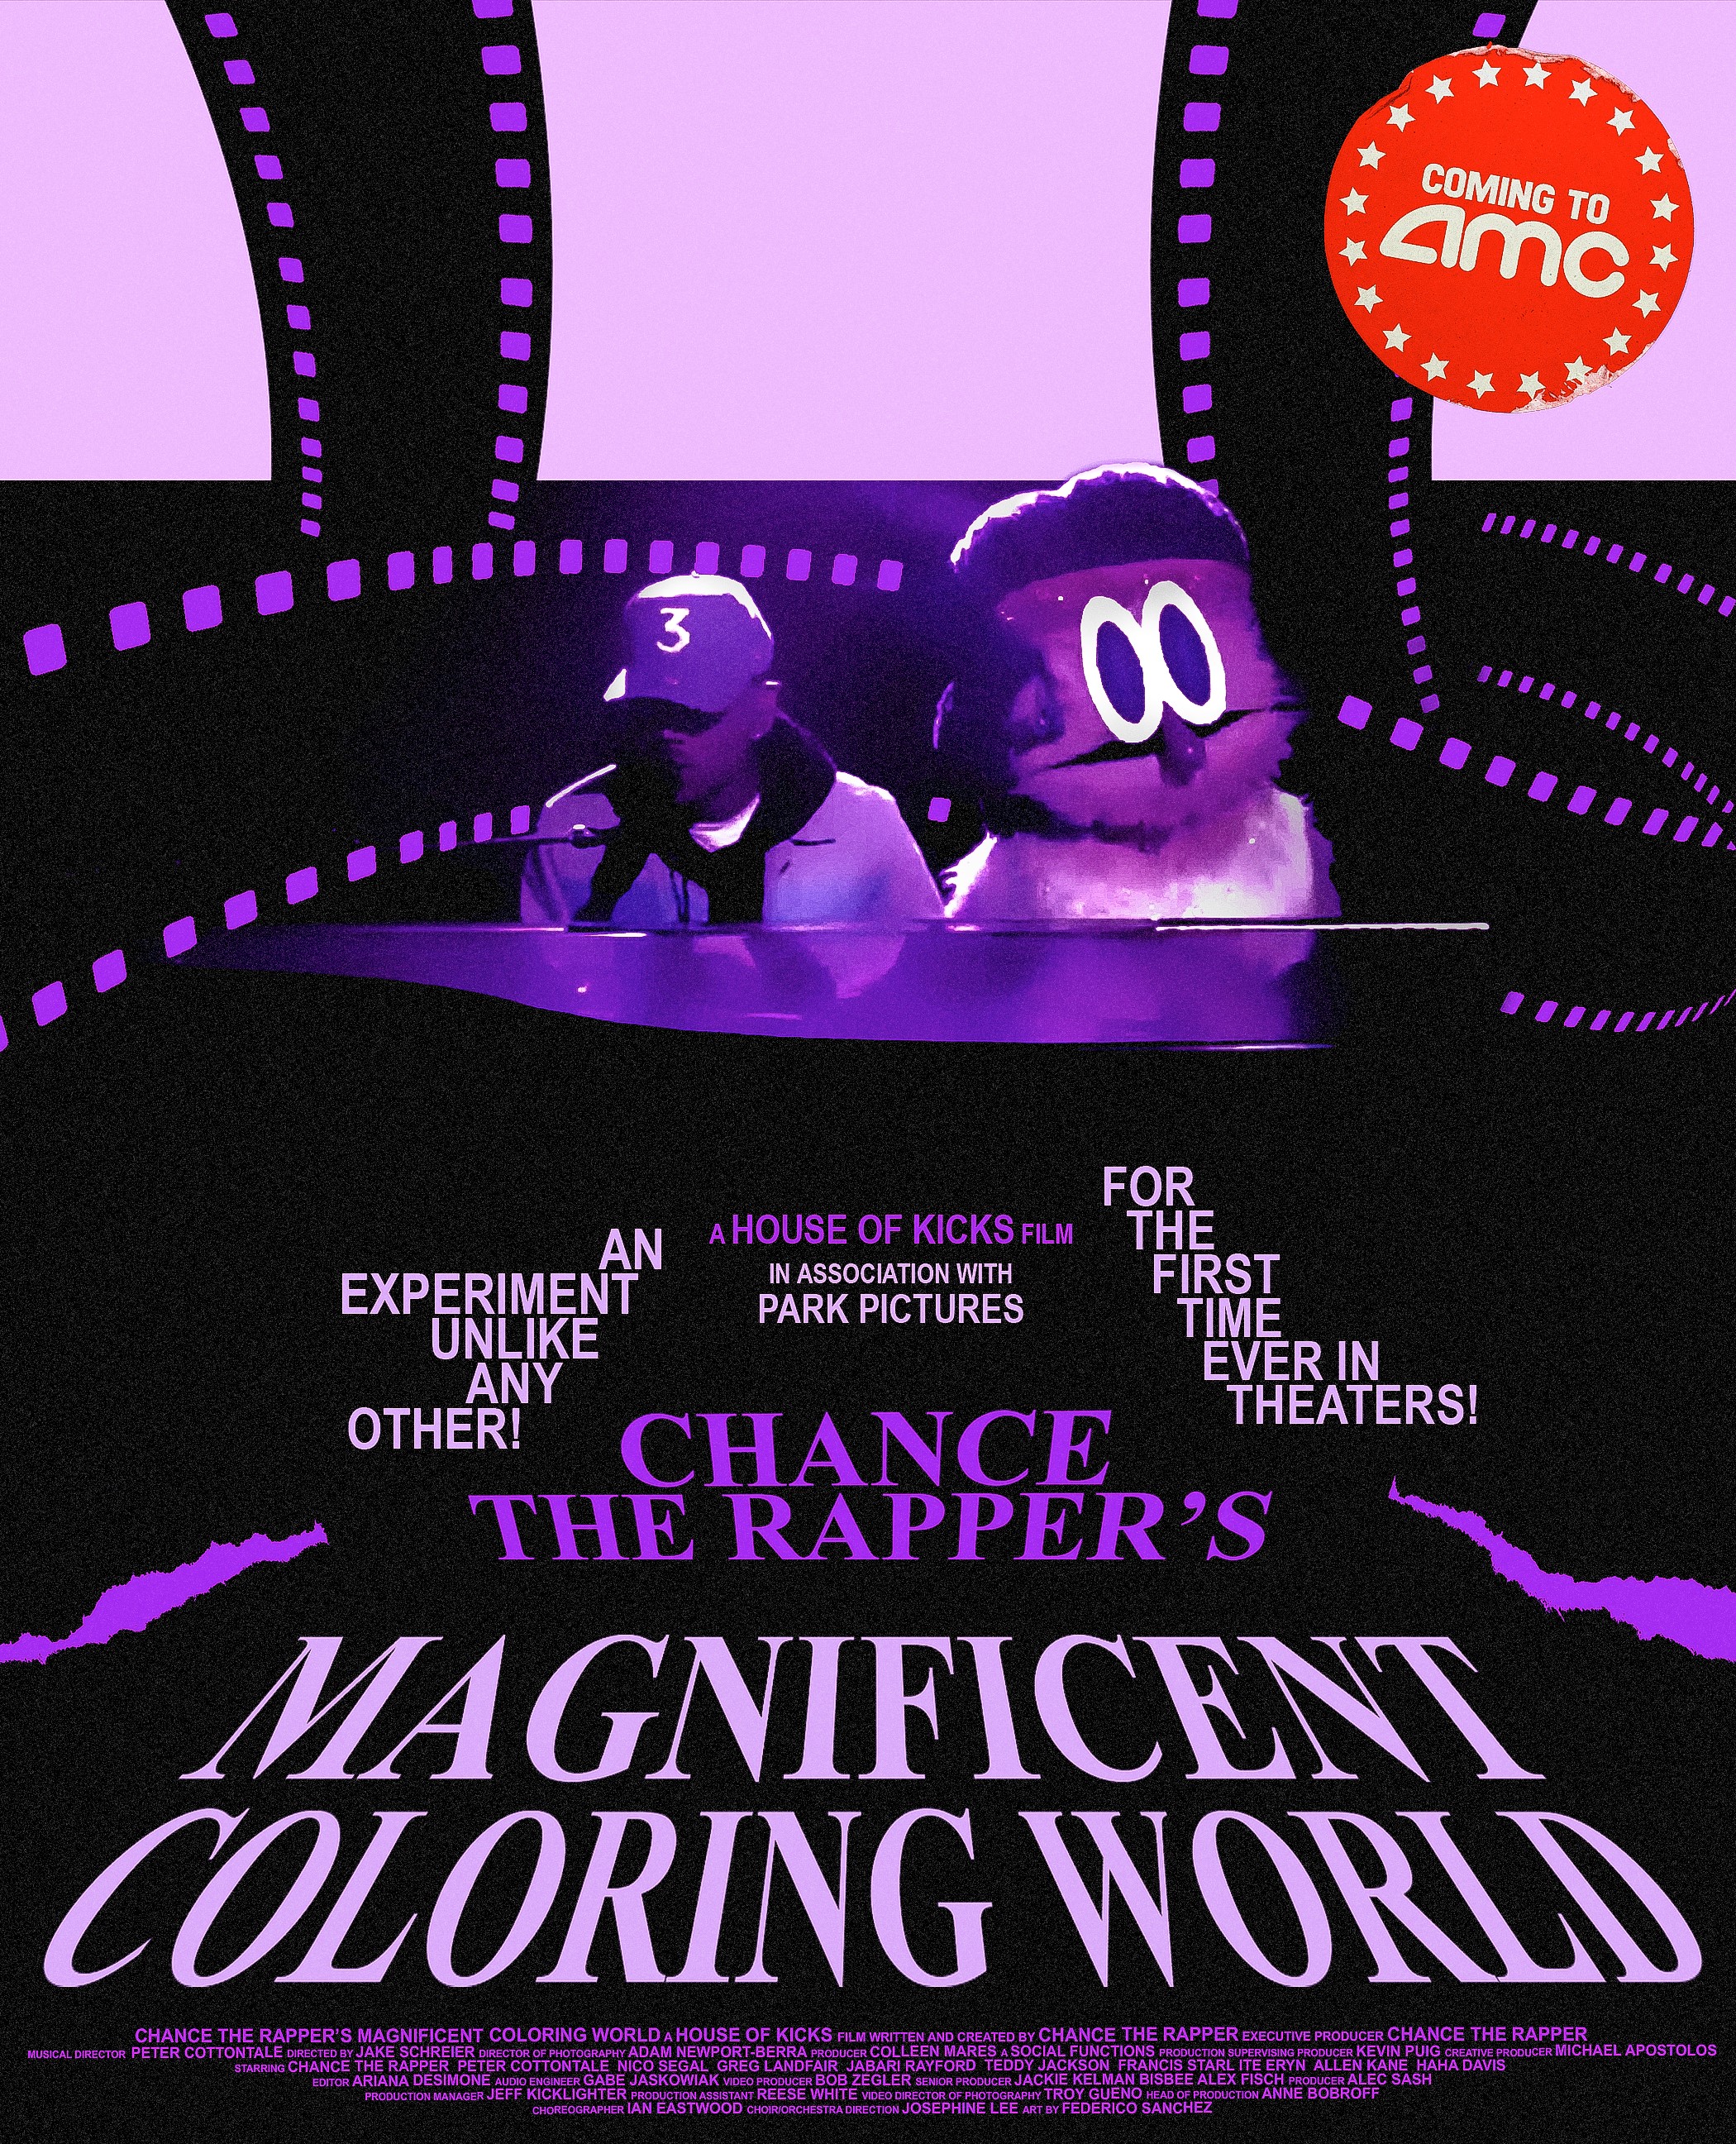 Download Chance The Rapper S Magnificent Coloring World At An Amc Theatre Near You